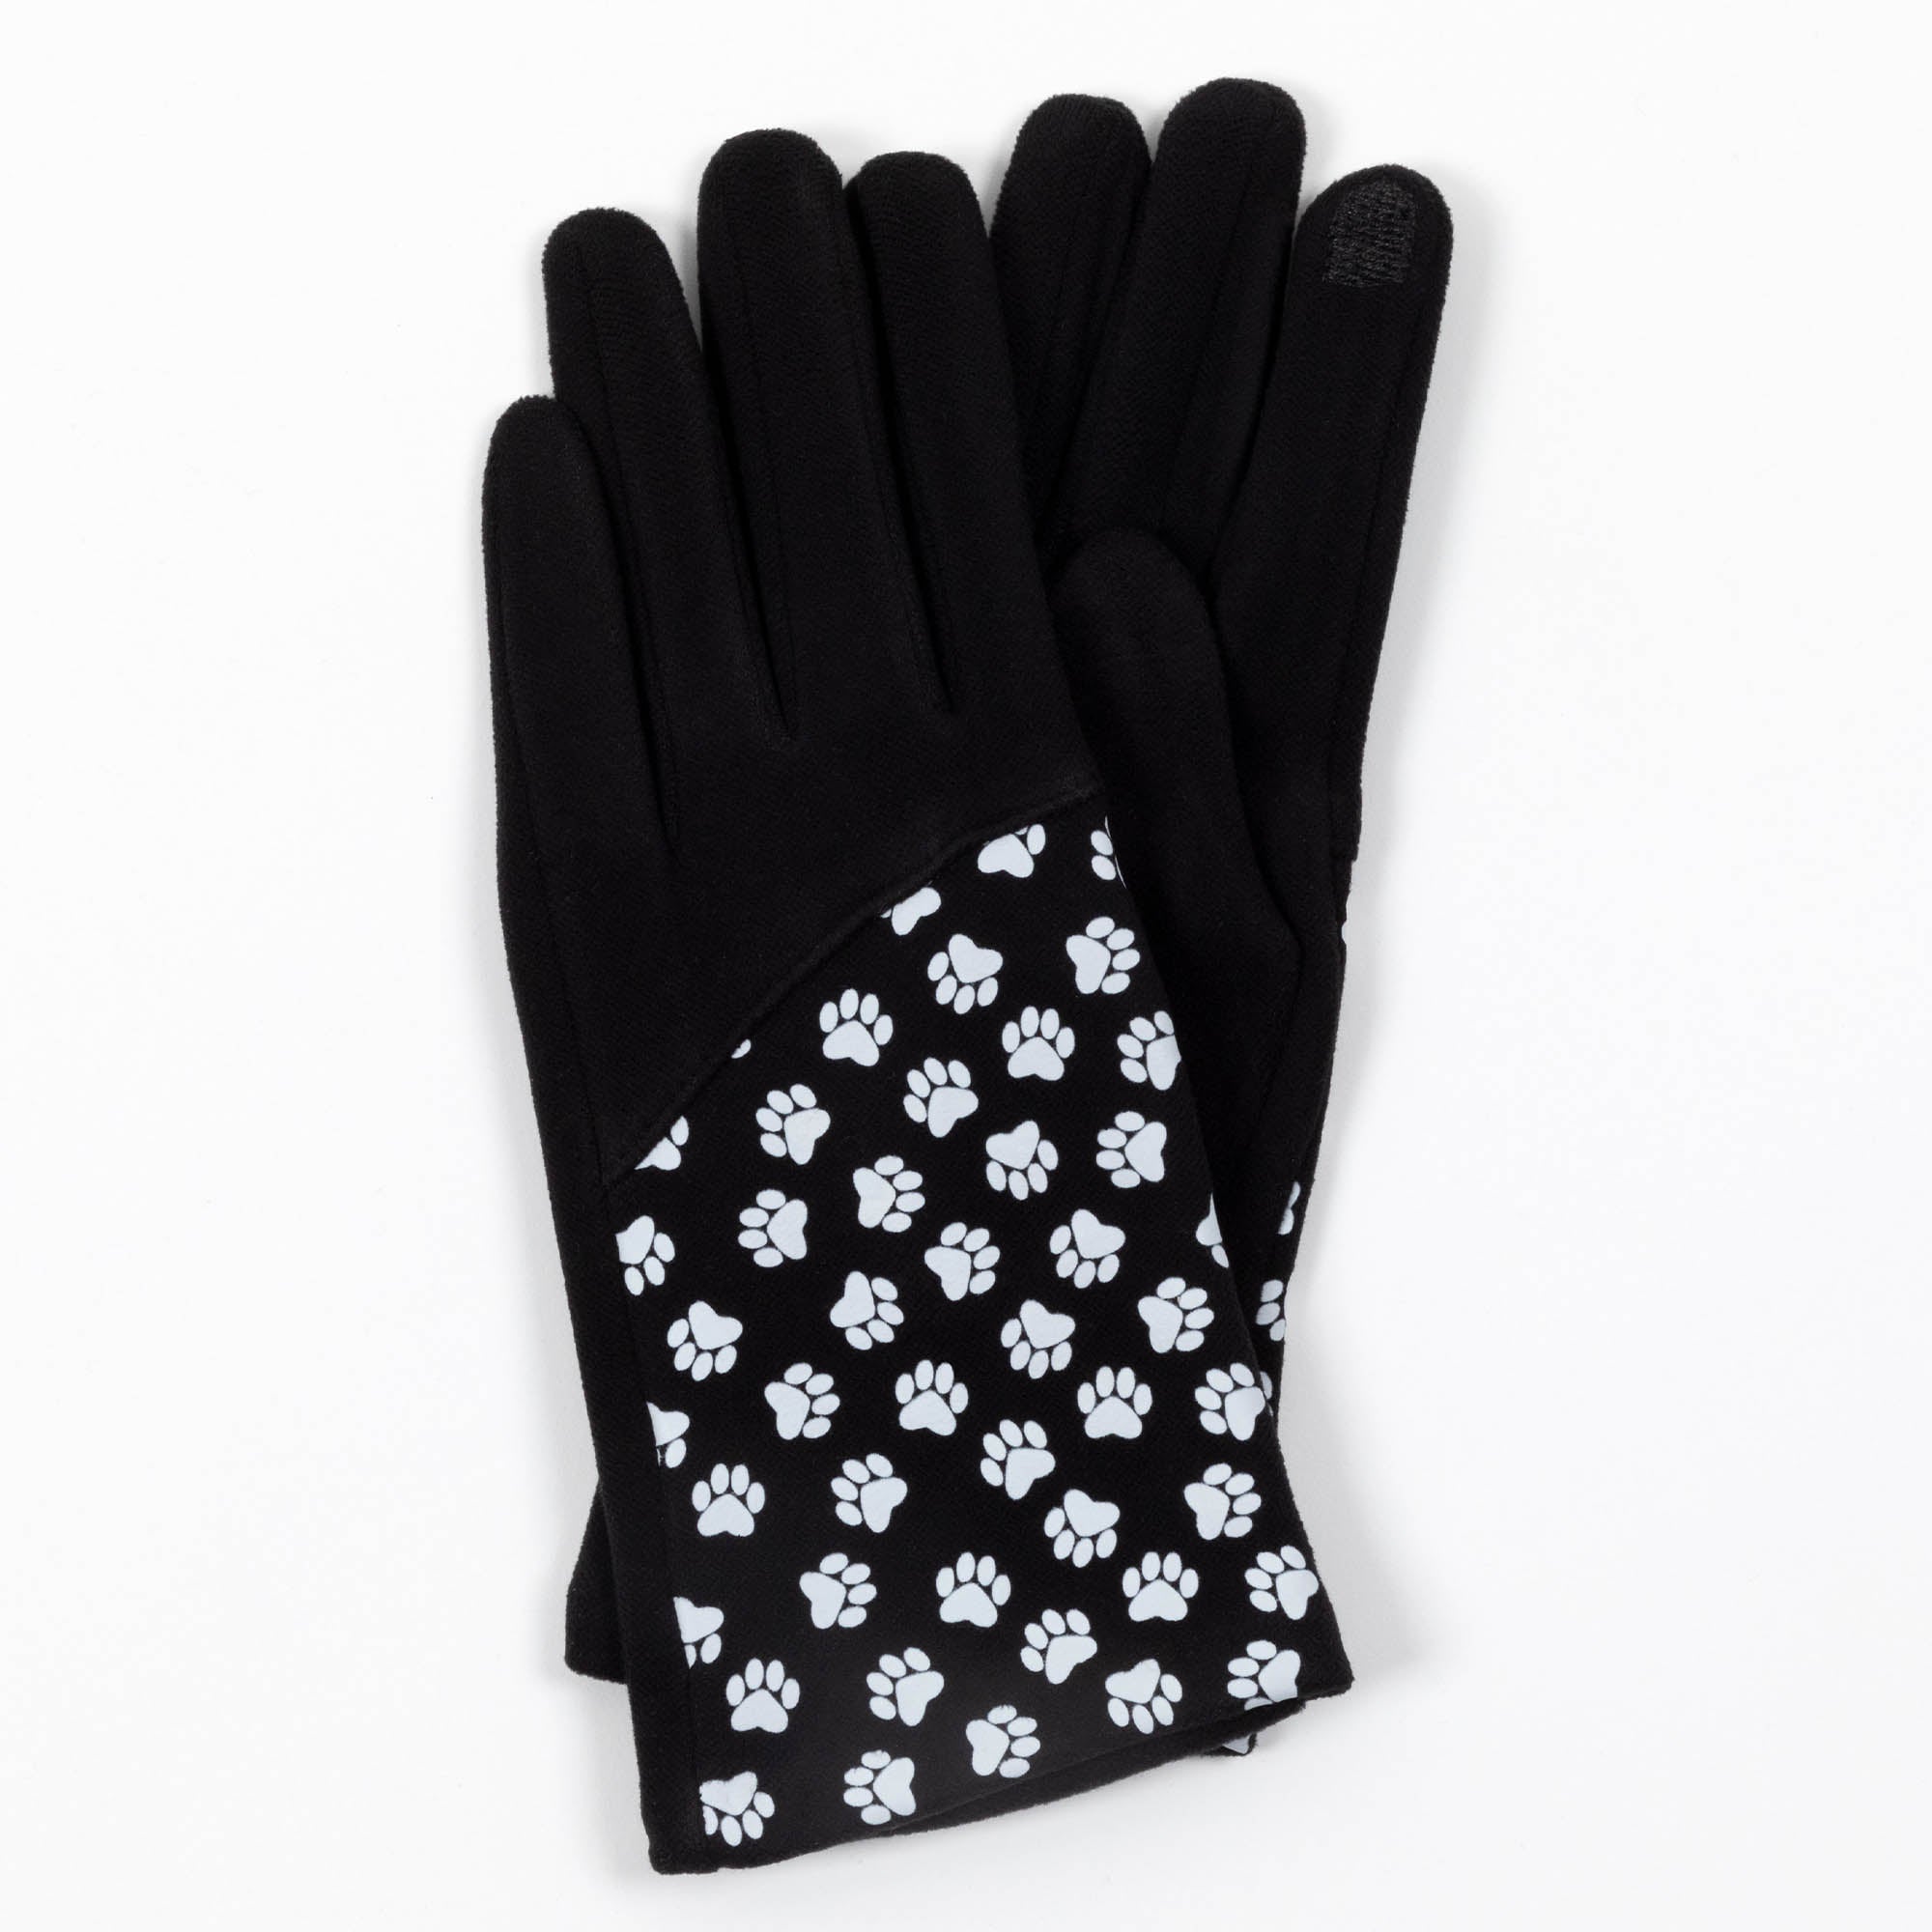 Vibrant Paws Touch Screen Gloves - White Paws